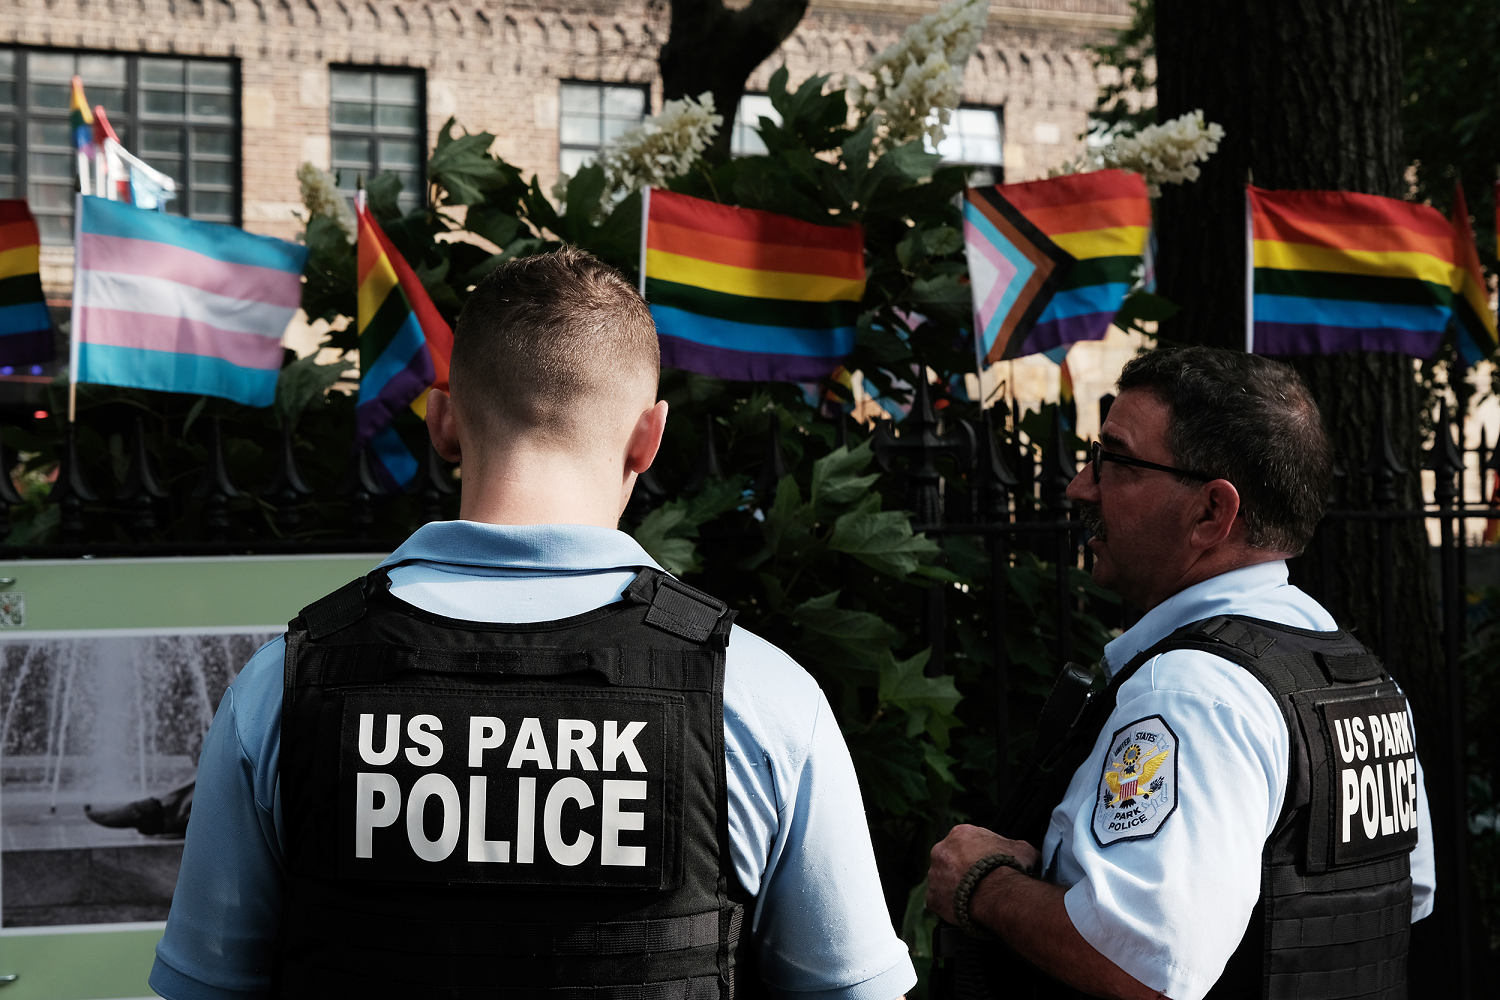 Pride flags were again vandalized at the Stonewall National Monument